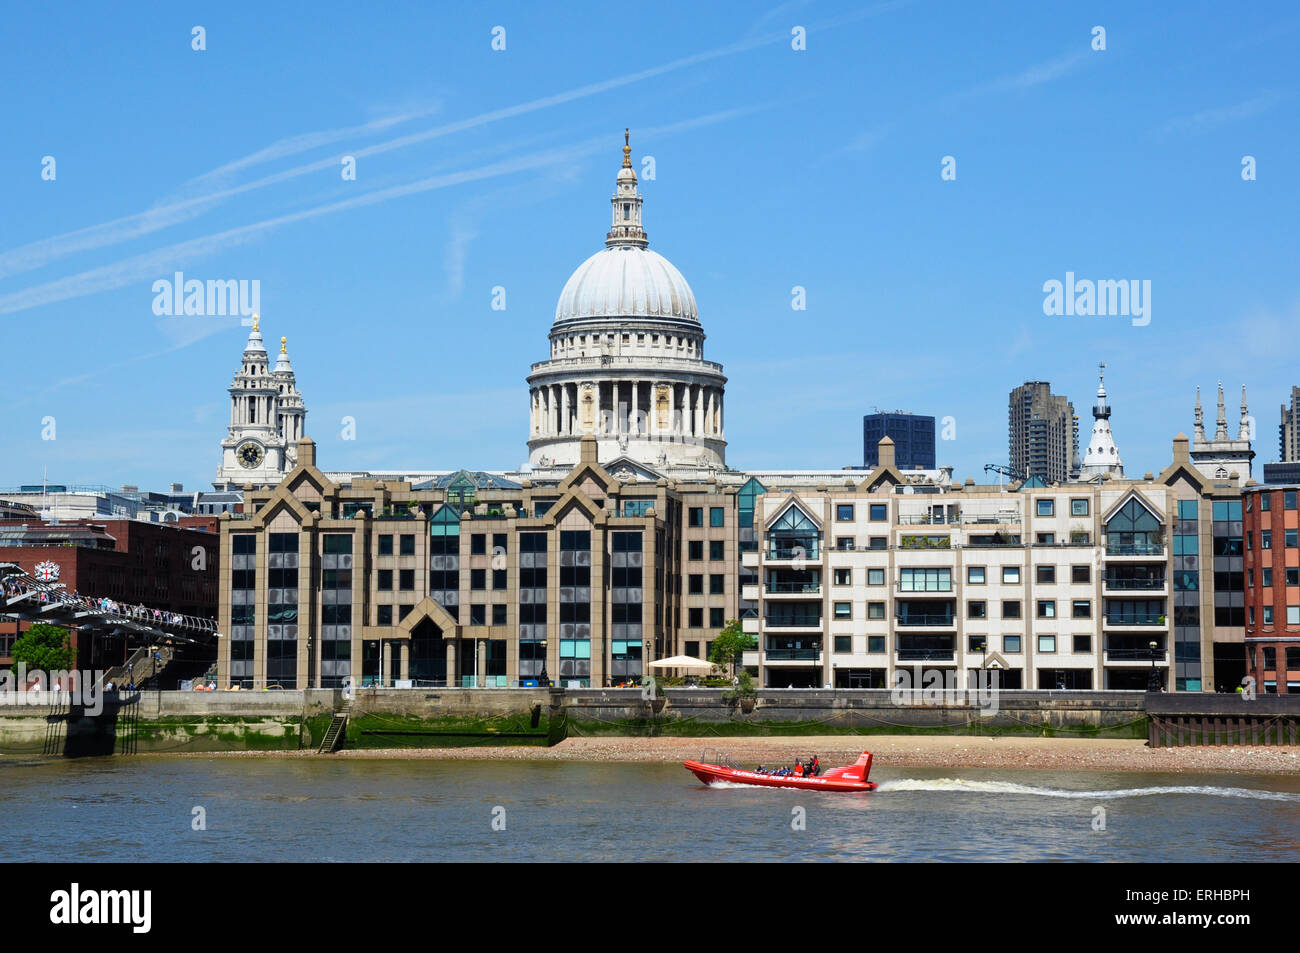 St Paul's Cathedral surrounded by modern buildings on the north bank of the River Thames, London, England, UK Stock Photo